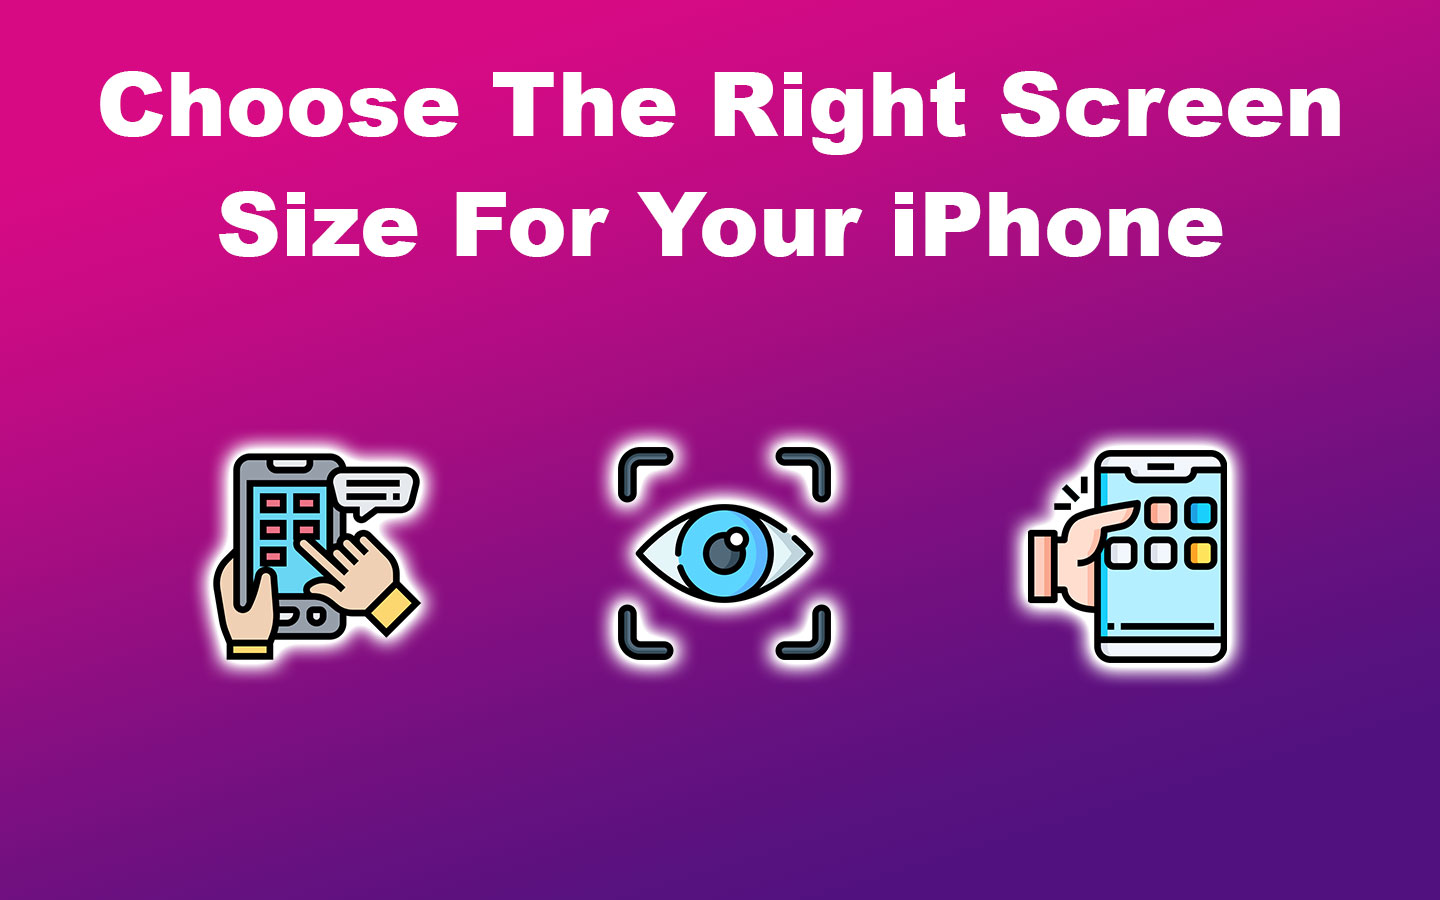 Choose The Right Screen Size For Your iPhone